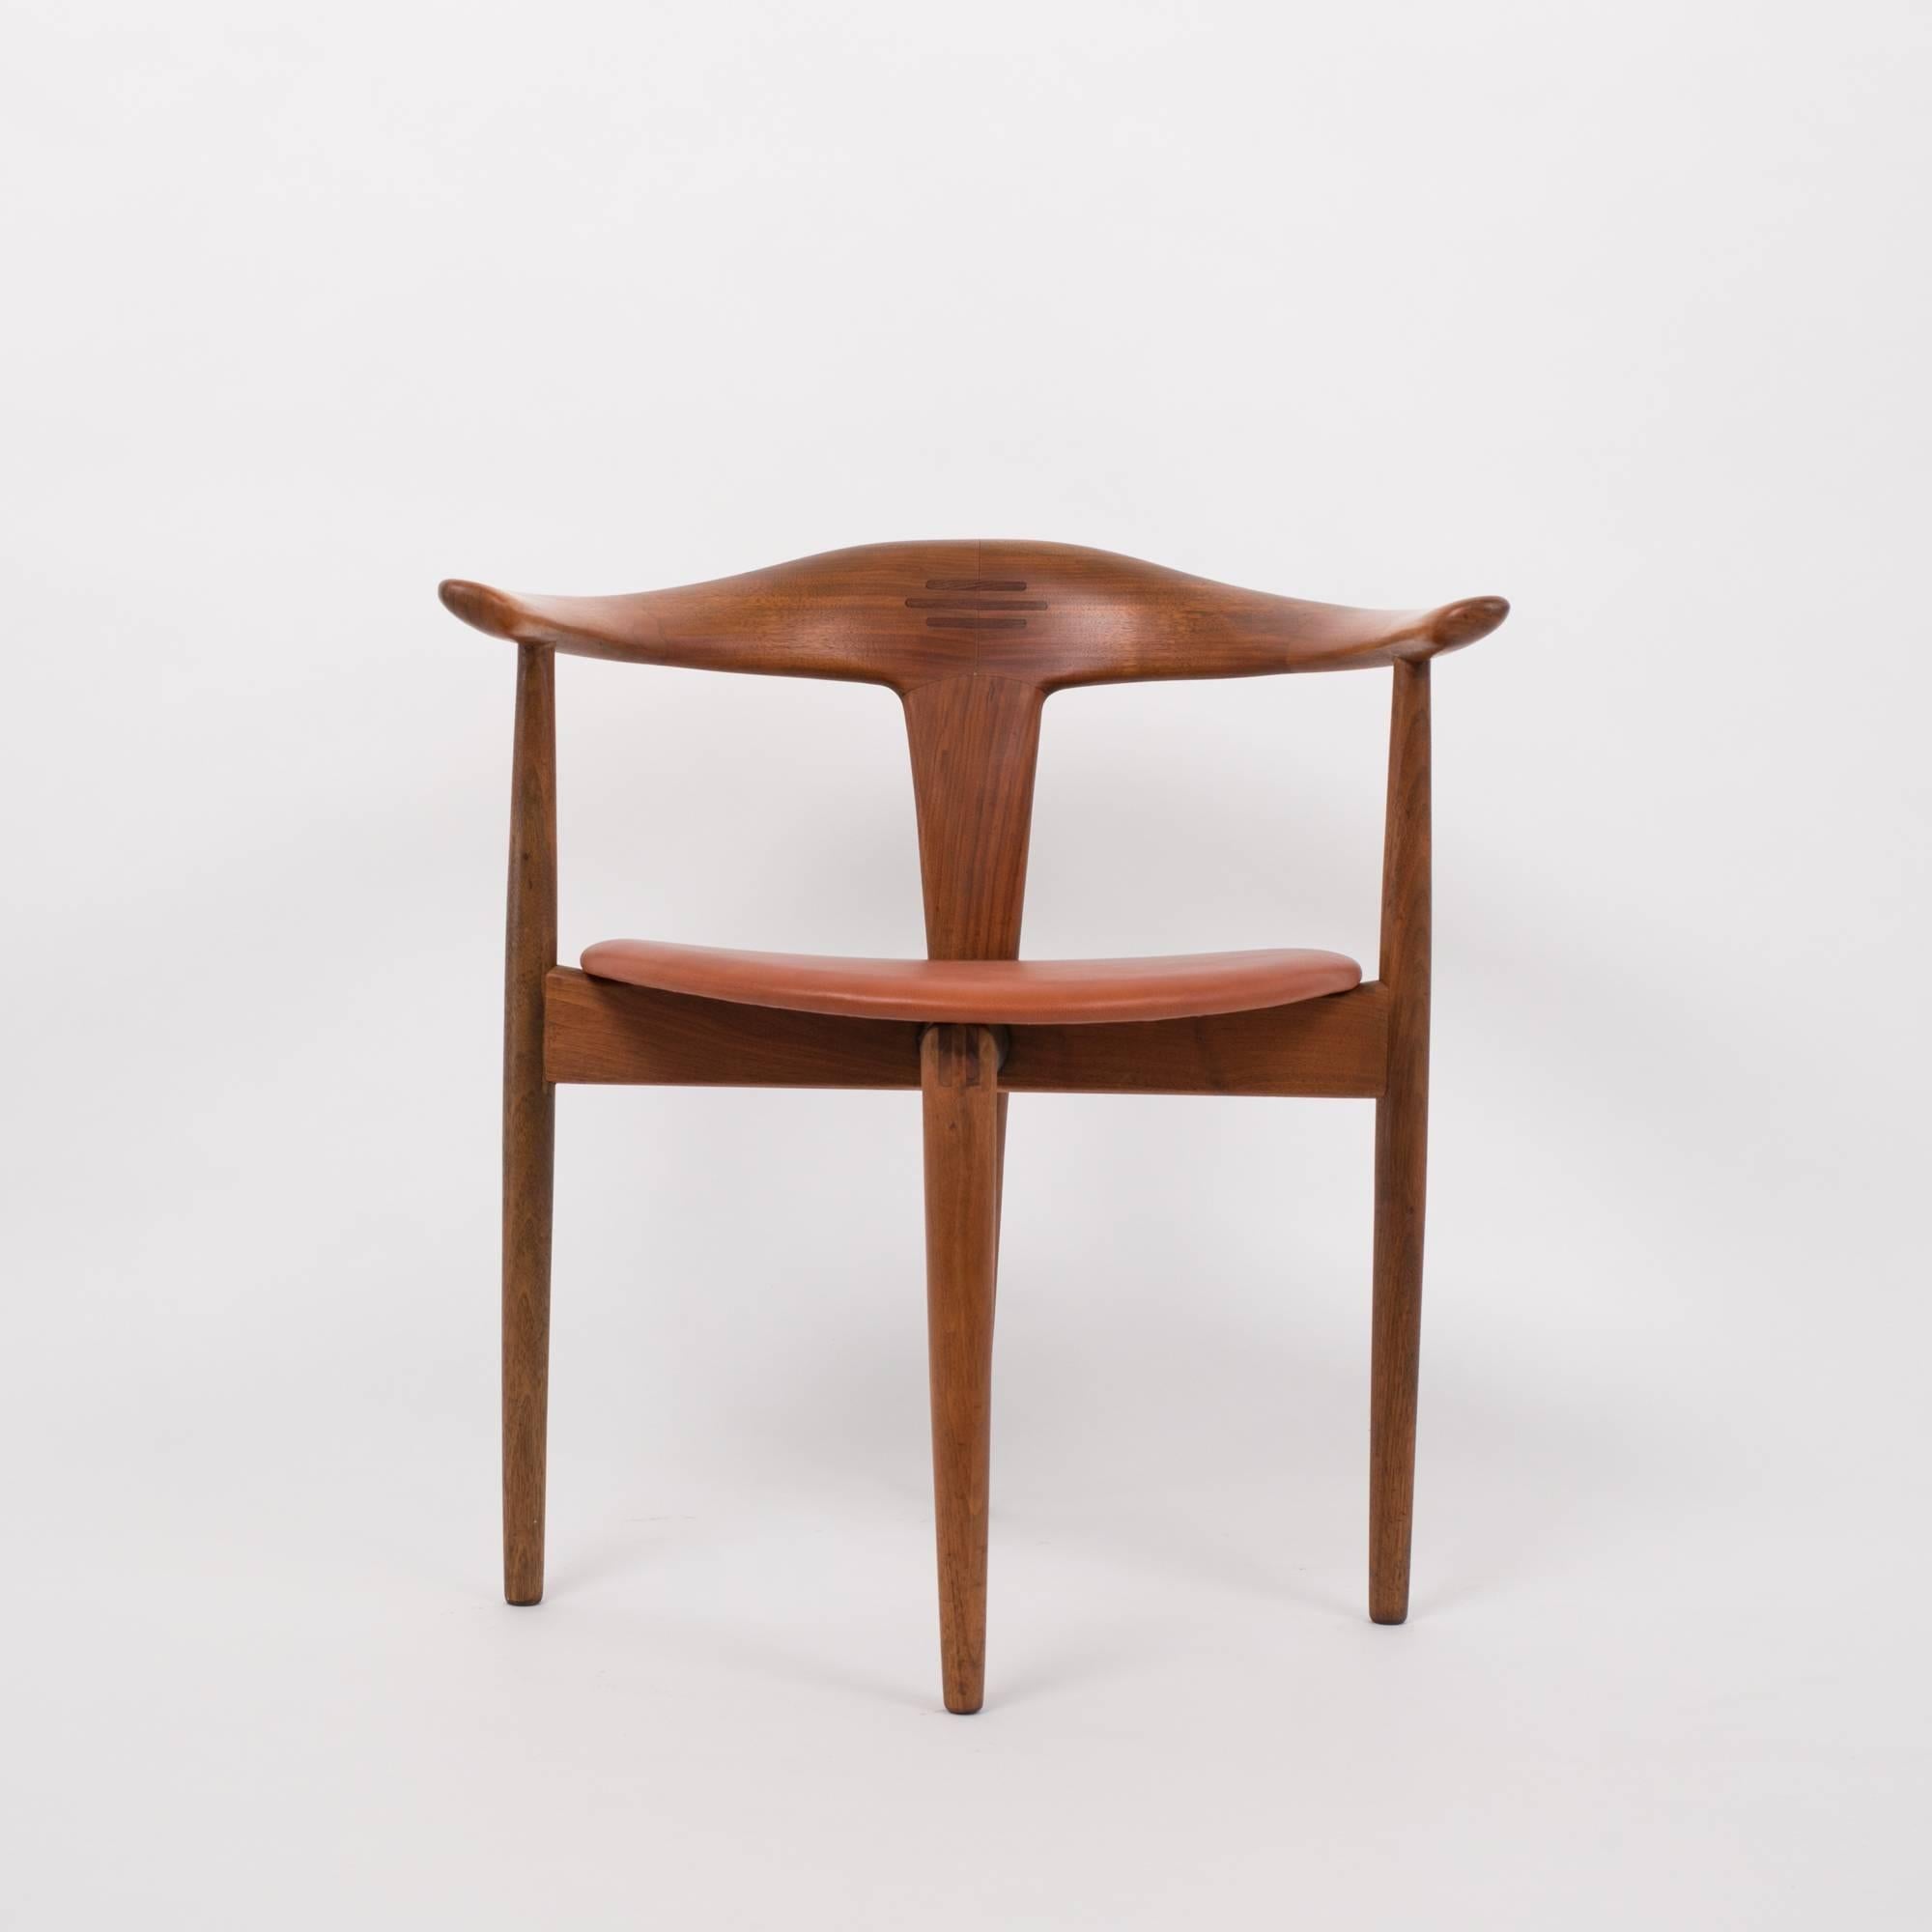 A single accent chair with a distinctive leg pattern by Pelle Pedersen and Erik Andersen. Made by the Danish Randers Møbelfabrik and imported to the US by M M Moreddi in 1963, the chair's four legs are arranged in a diamond pattern, with two legs